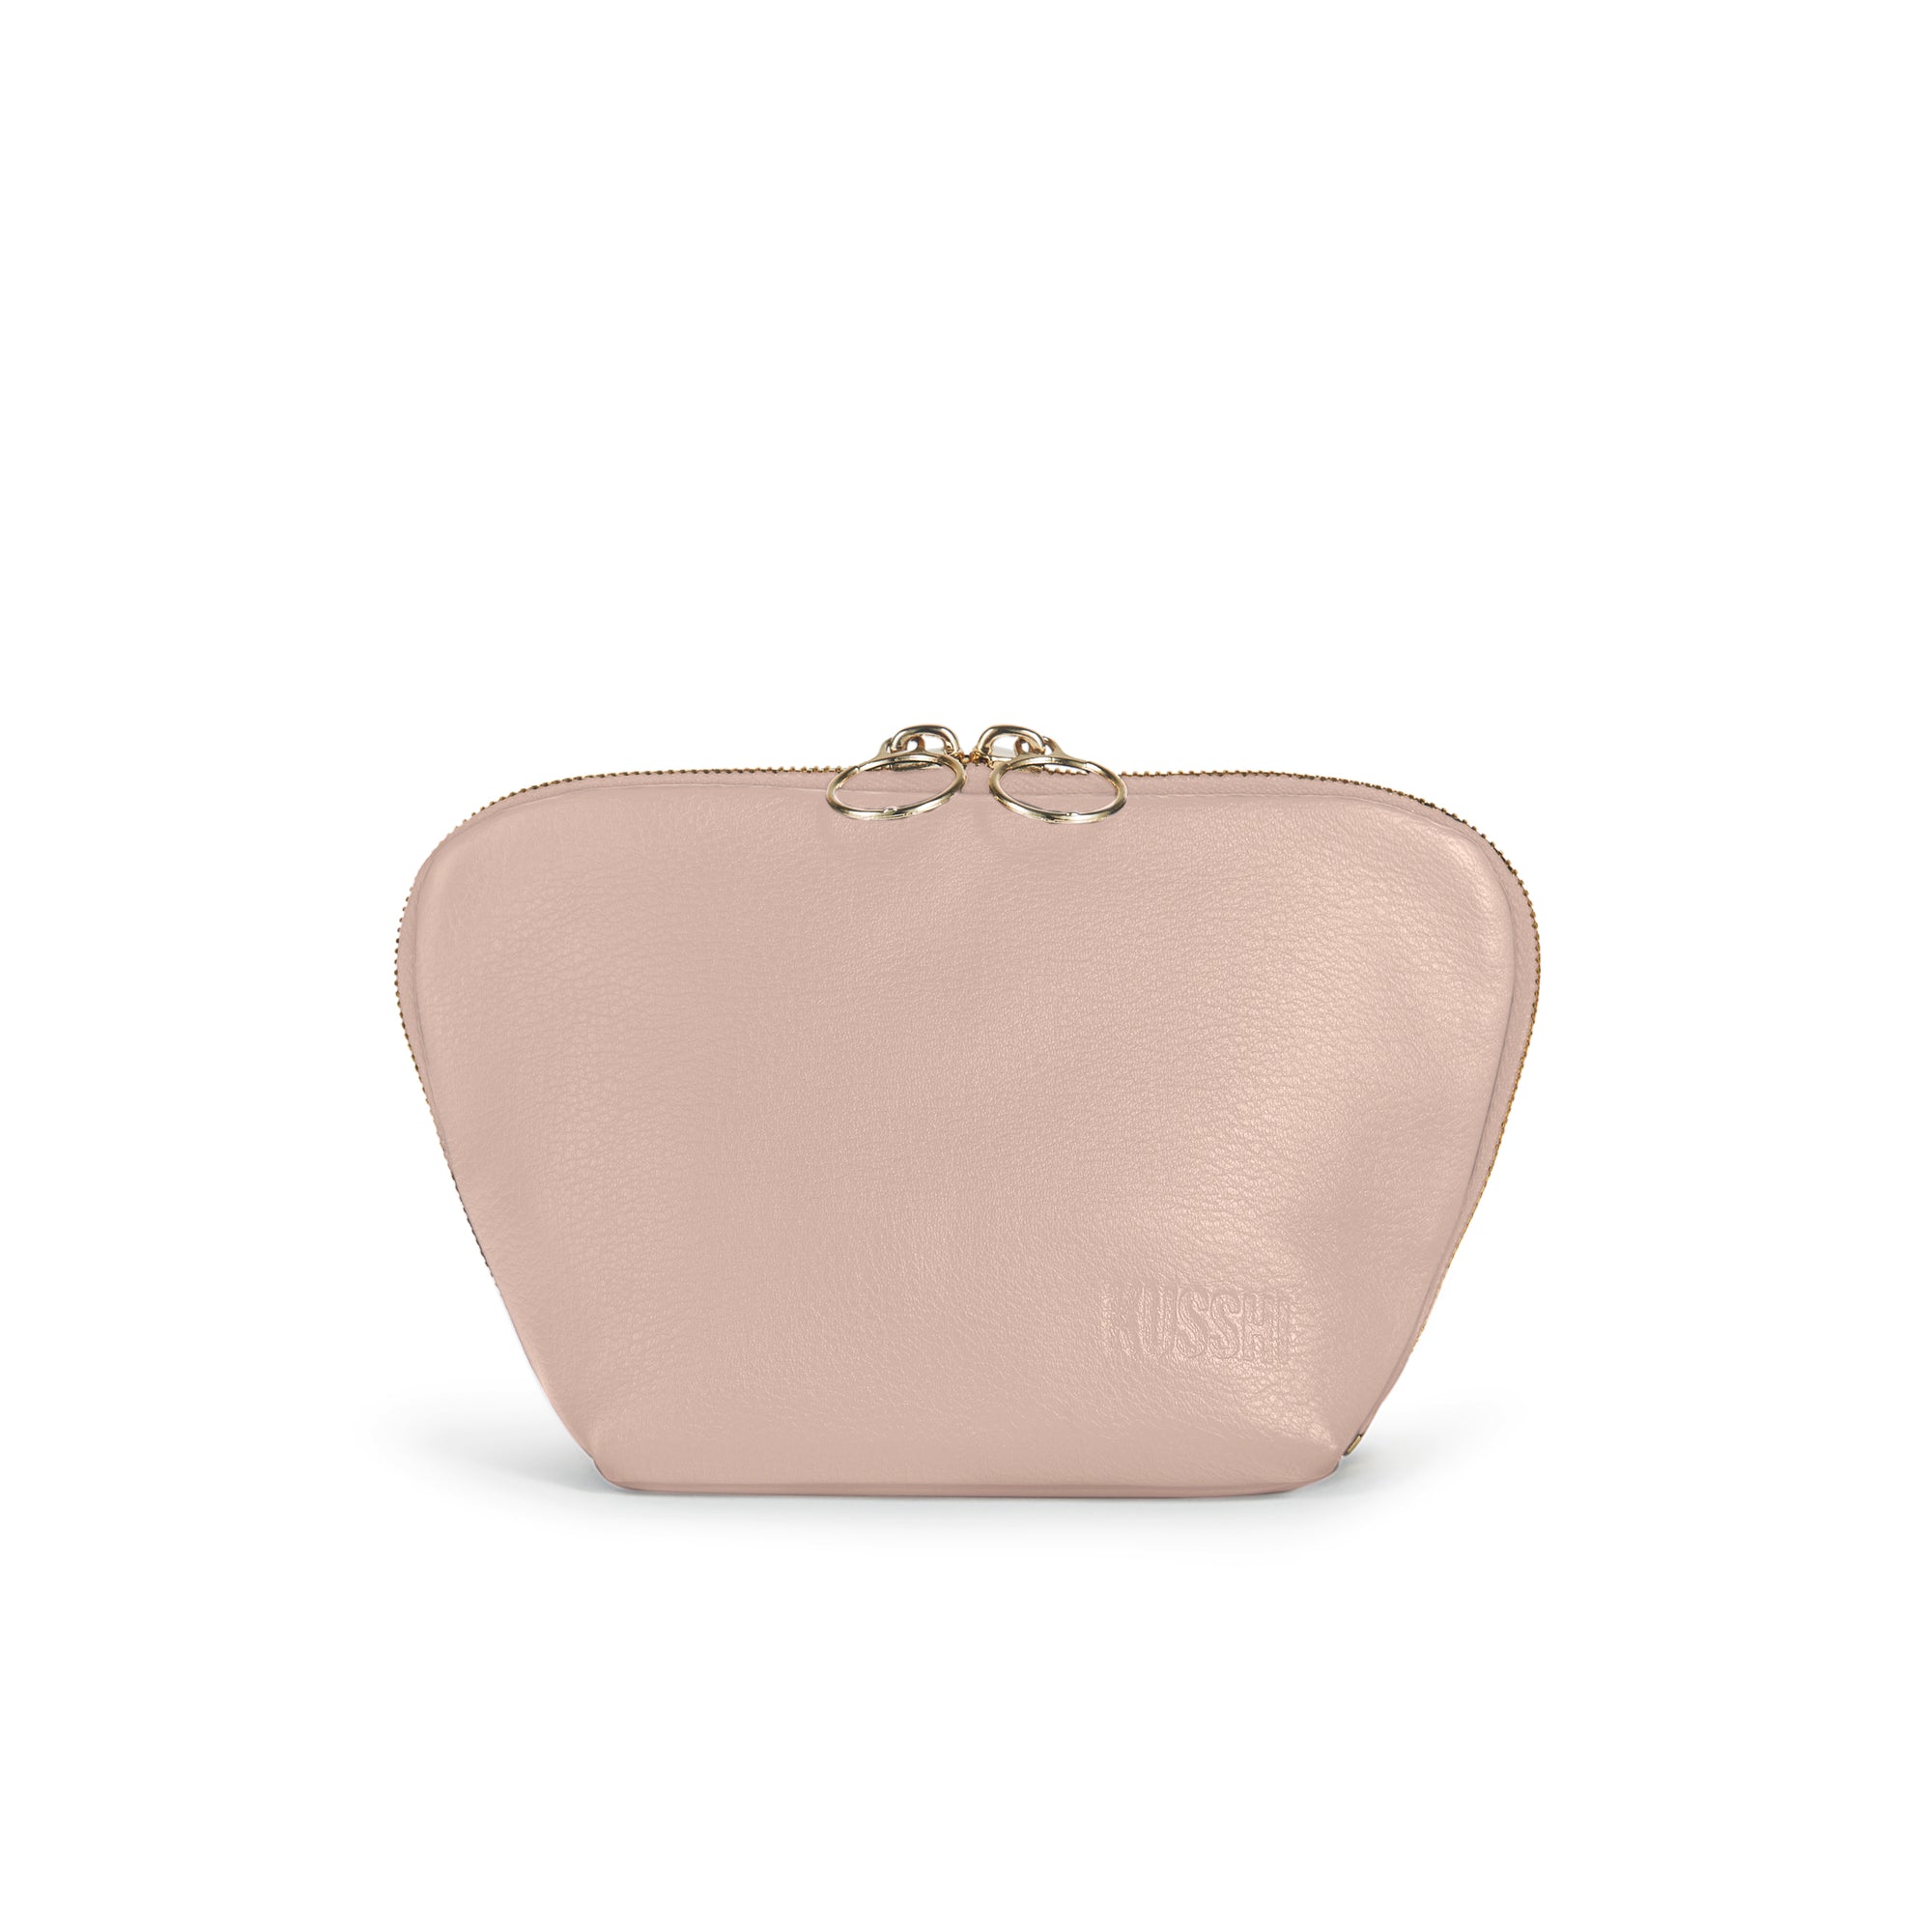 color: Blush Pink Leather with Cool Grey Interior; alt: Everyday Small Size Makeup Bag | KUSSHI